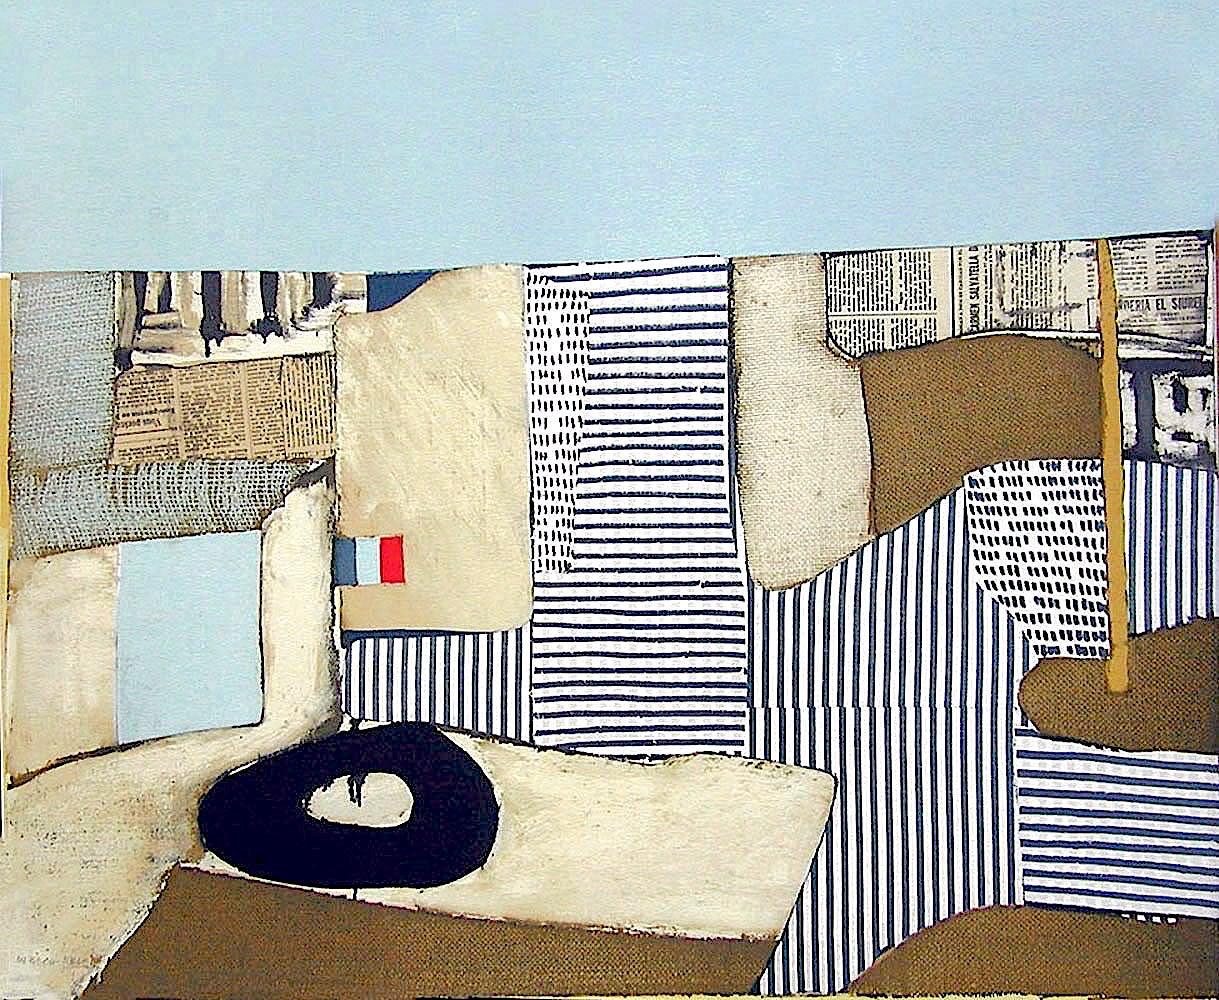 Conrad Marca-Relli Abstract Print - VILLA NEUVE Signed Lithograph, City Landscape Collage, Modernist Abstract, Flag